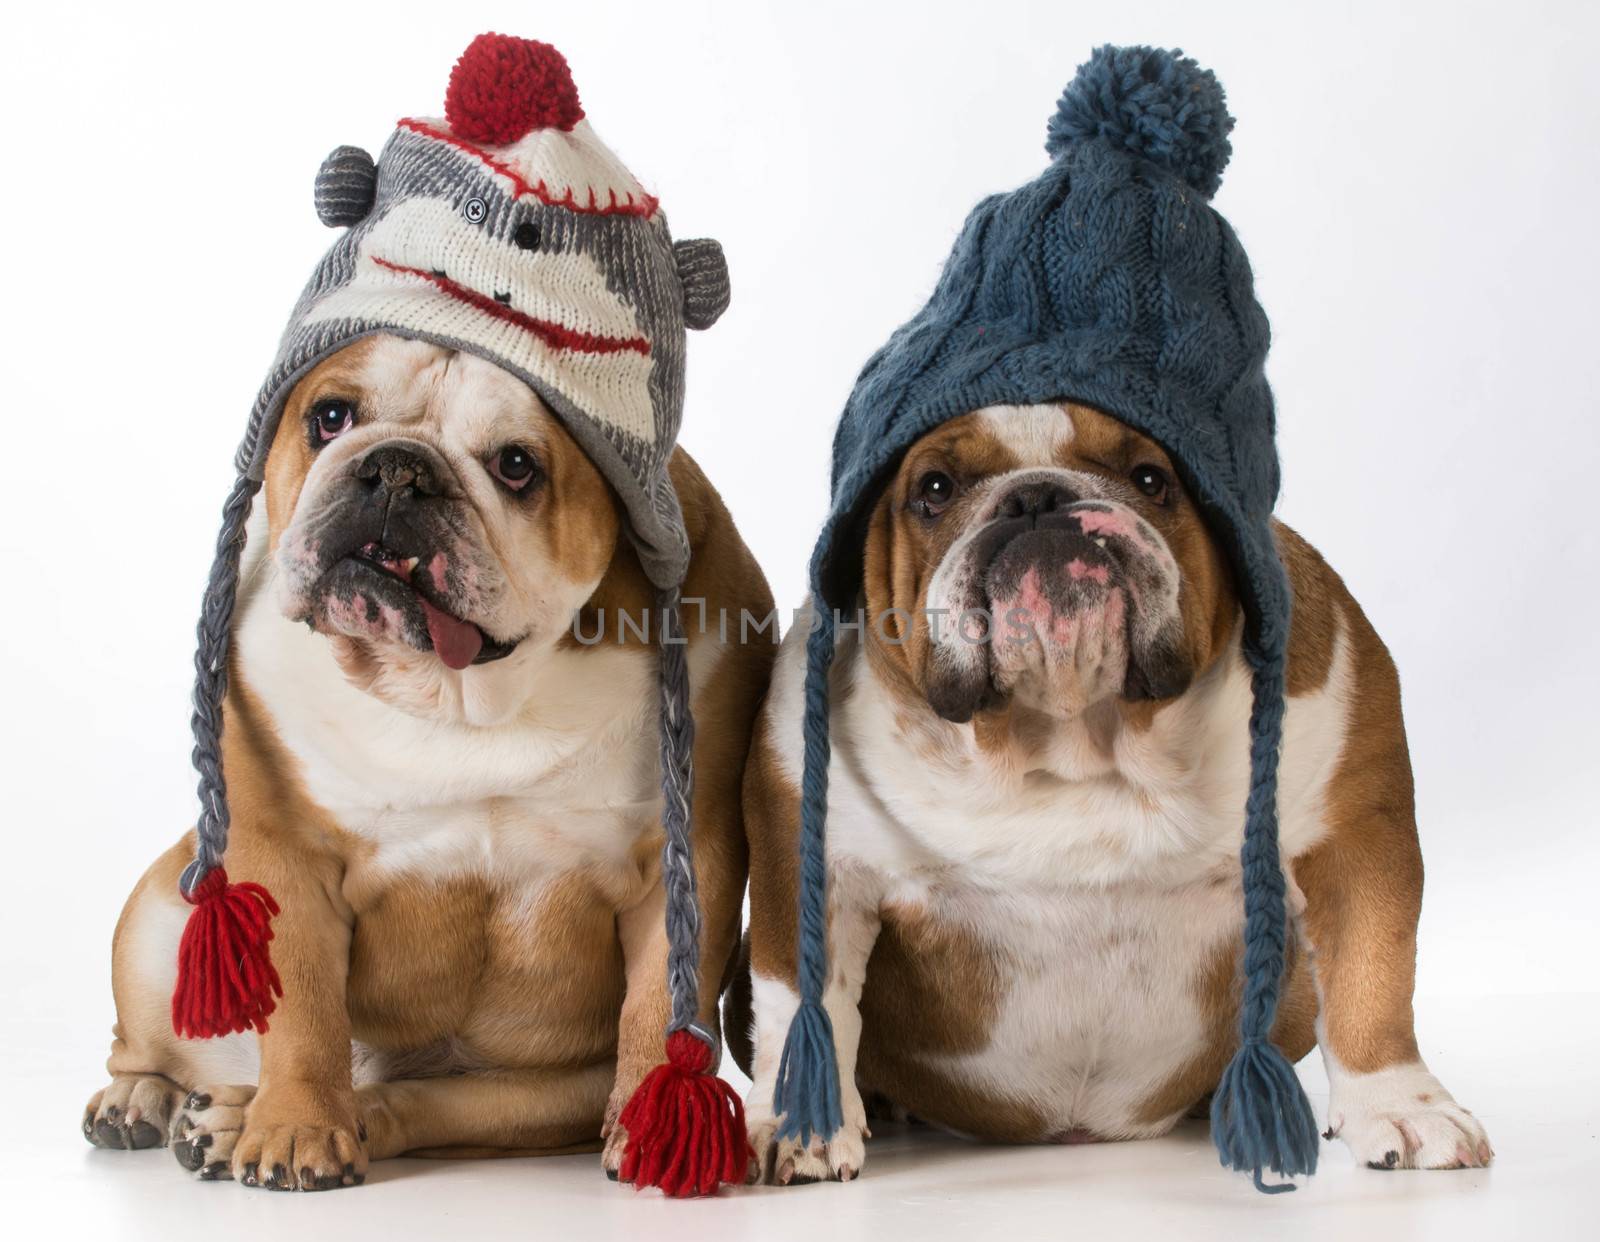 two dogs dressed for winter - english bulldogs wearing winter hats